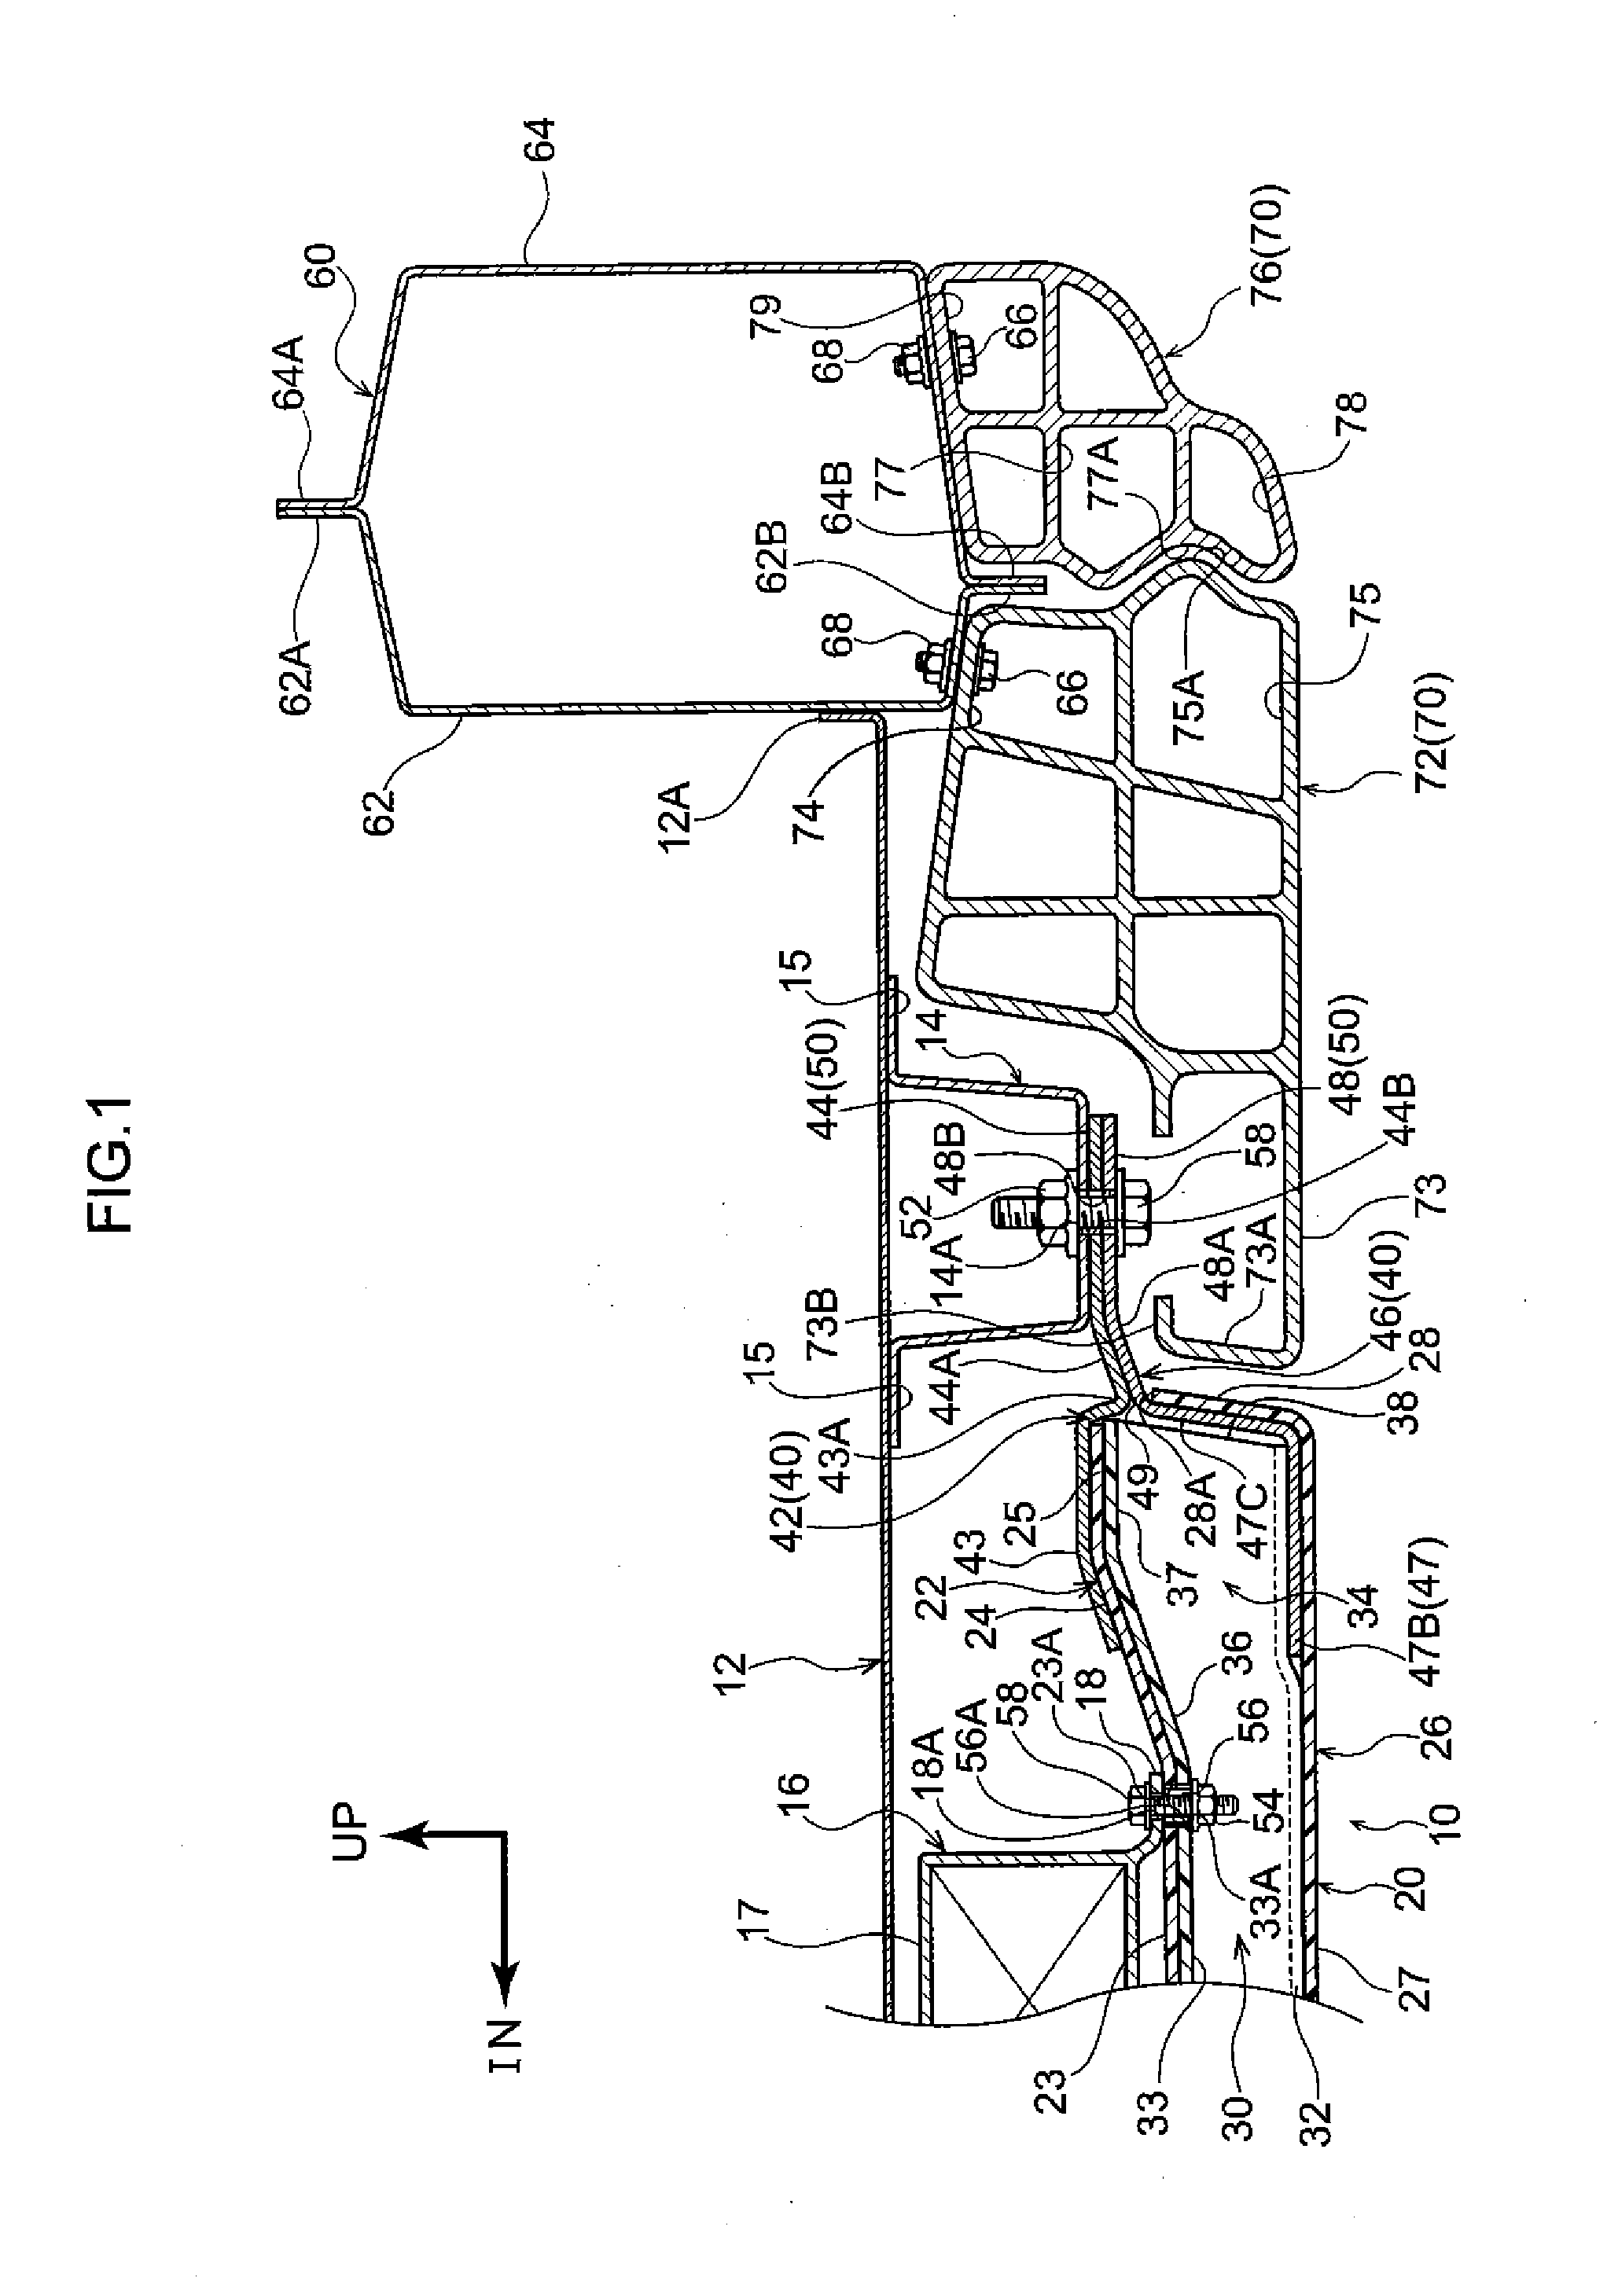 Vehicle battery mounting structure